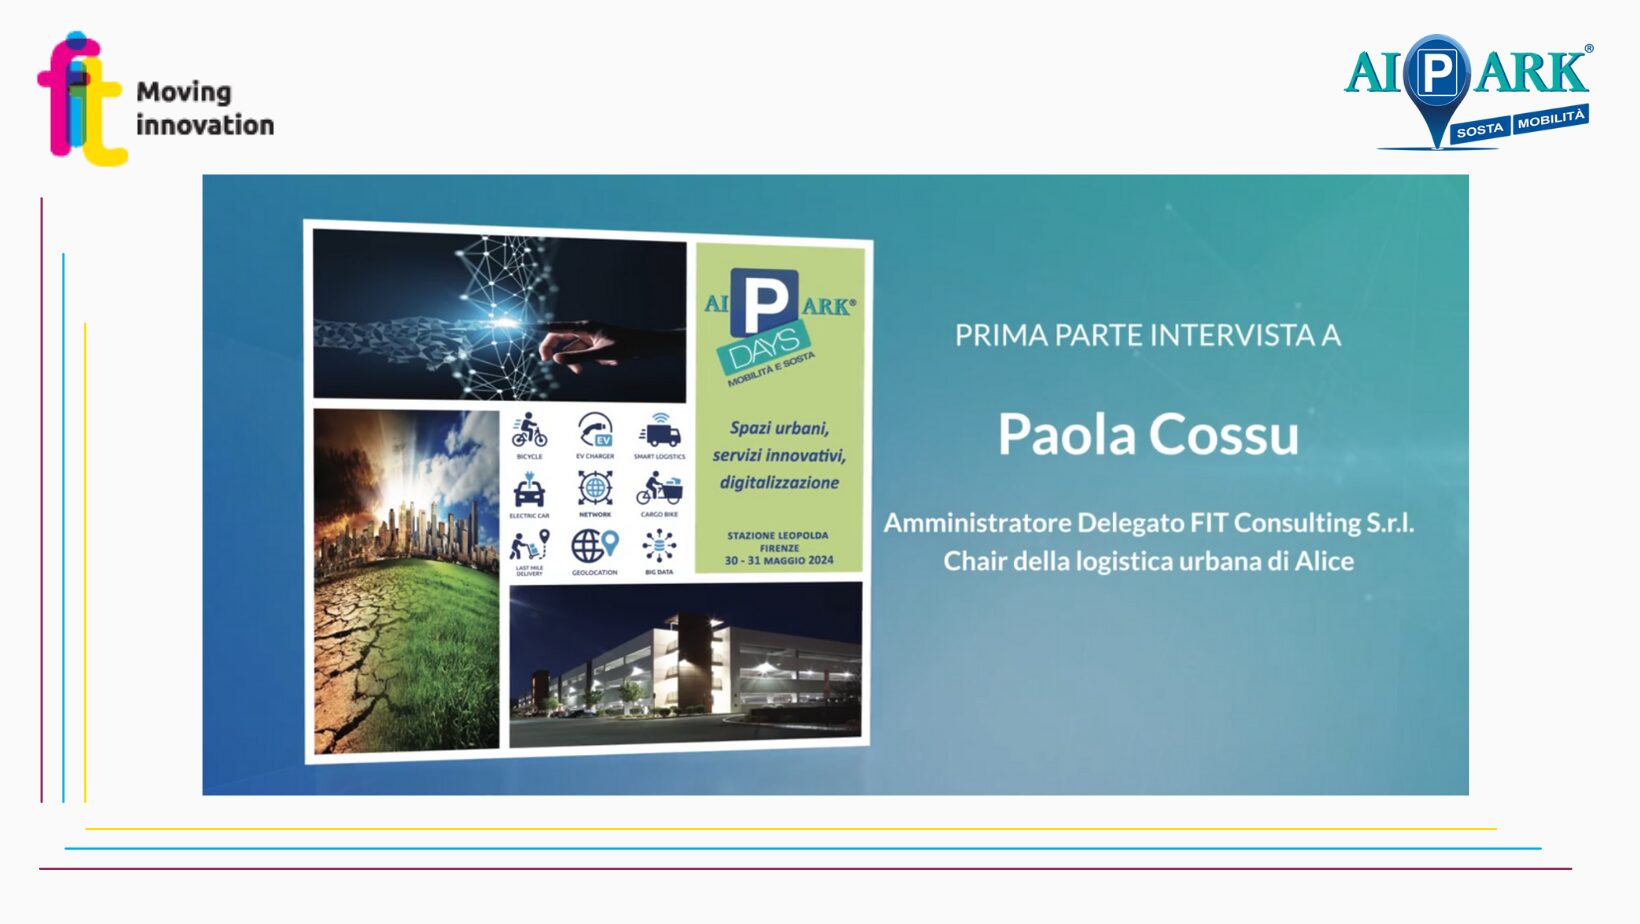 ‘Here’s how to manage urban spaces for logistics efficiently and sustainably’: interview with Paola Cossu, CEO FIT, ahead of her participation in Pdays 2024